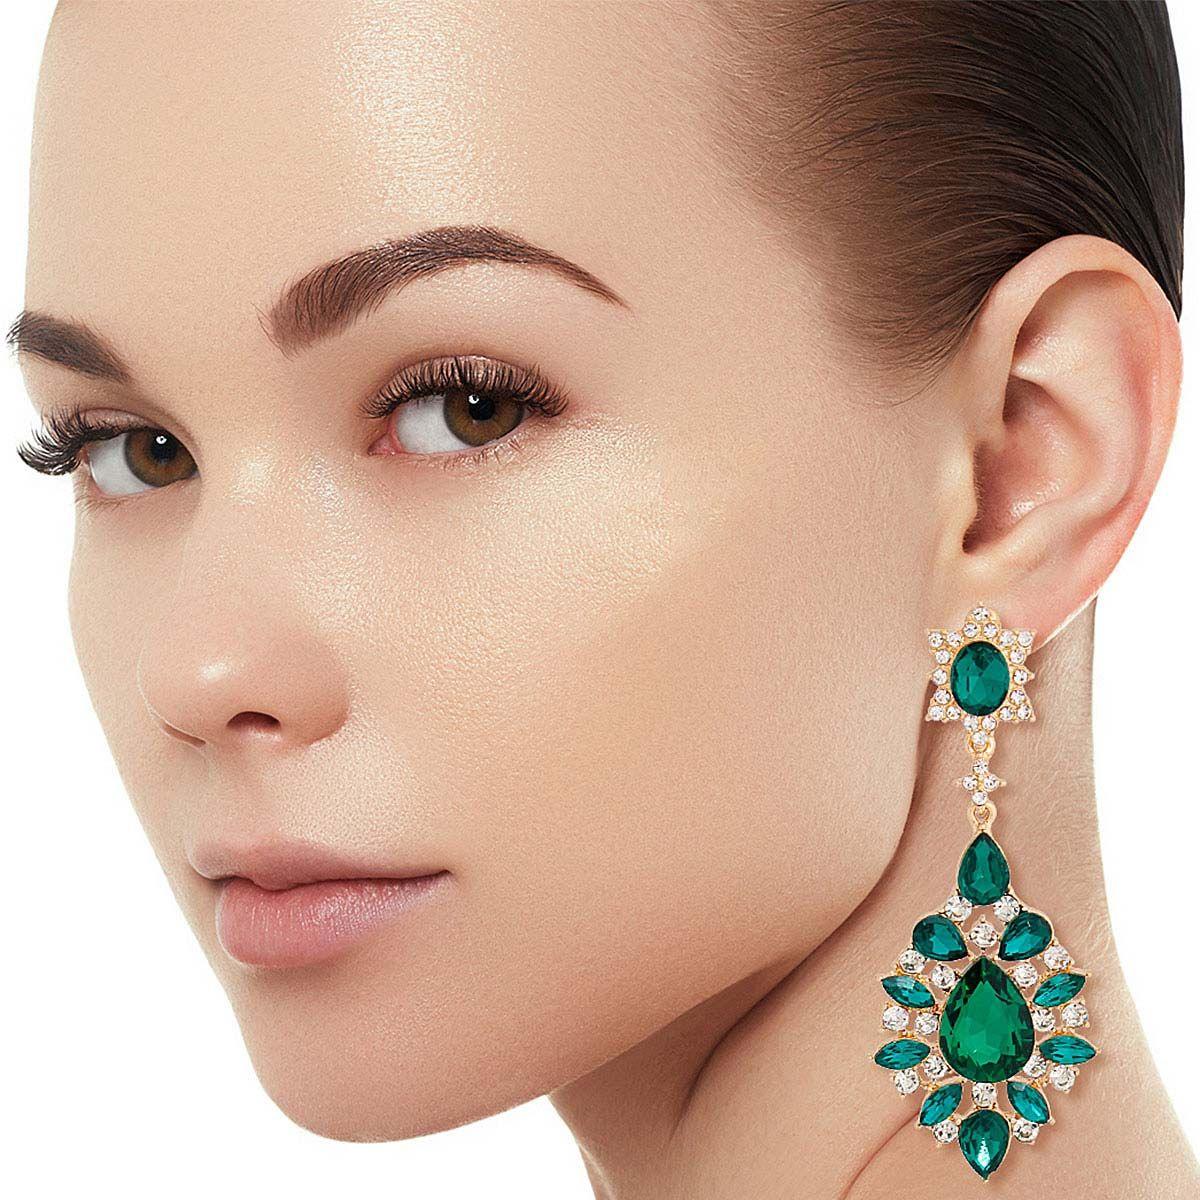 Must-Have Green/Gold Teardrop Earrings: Sparkle with Rhinestone Detail